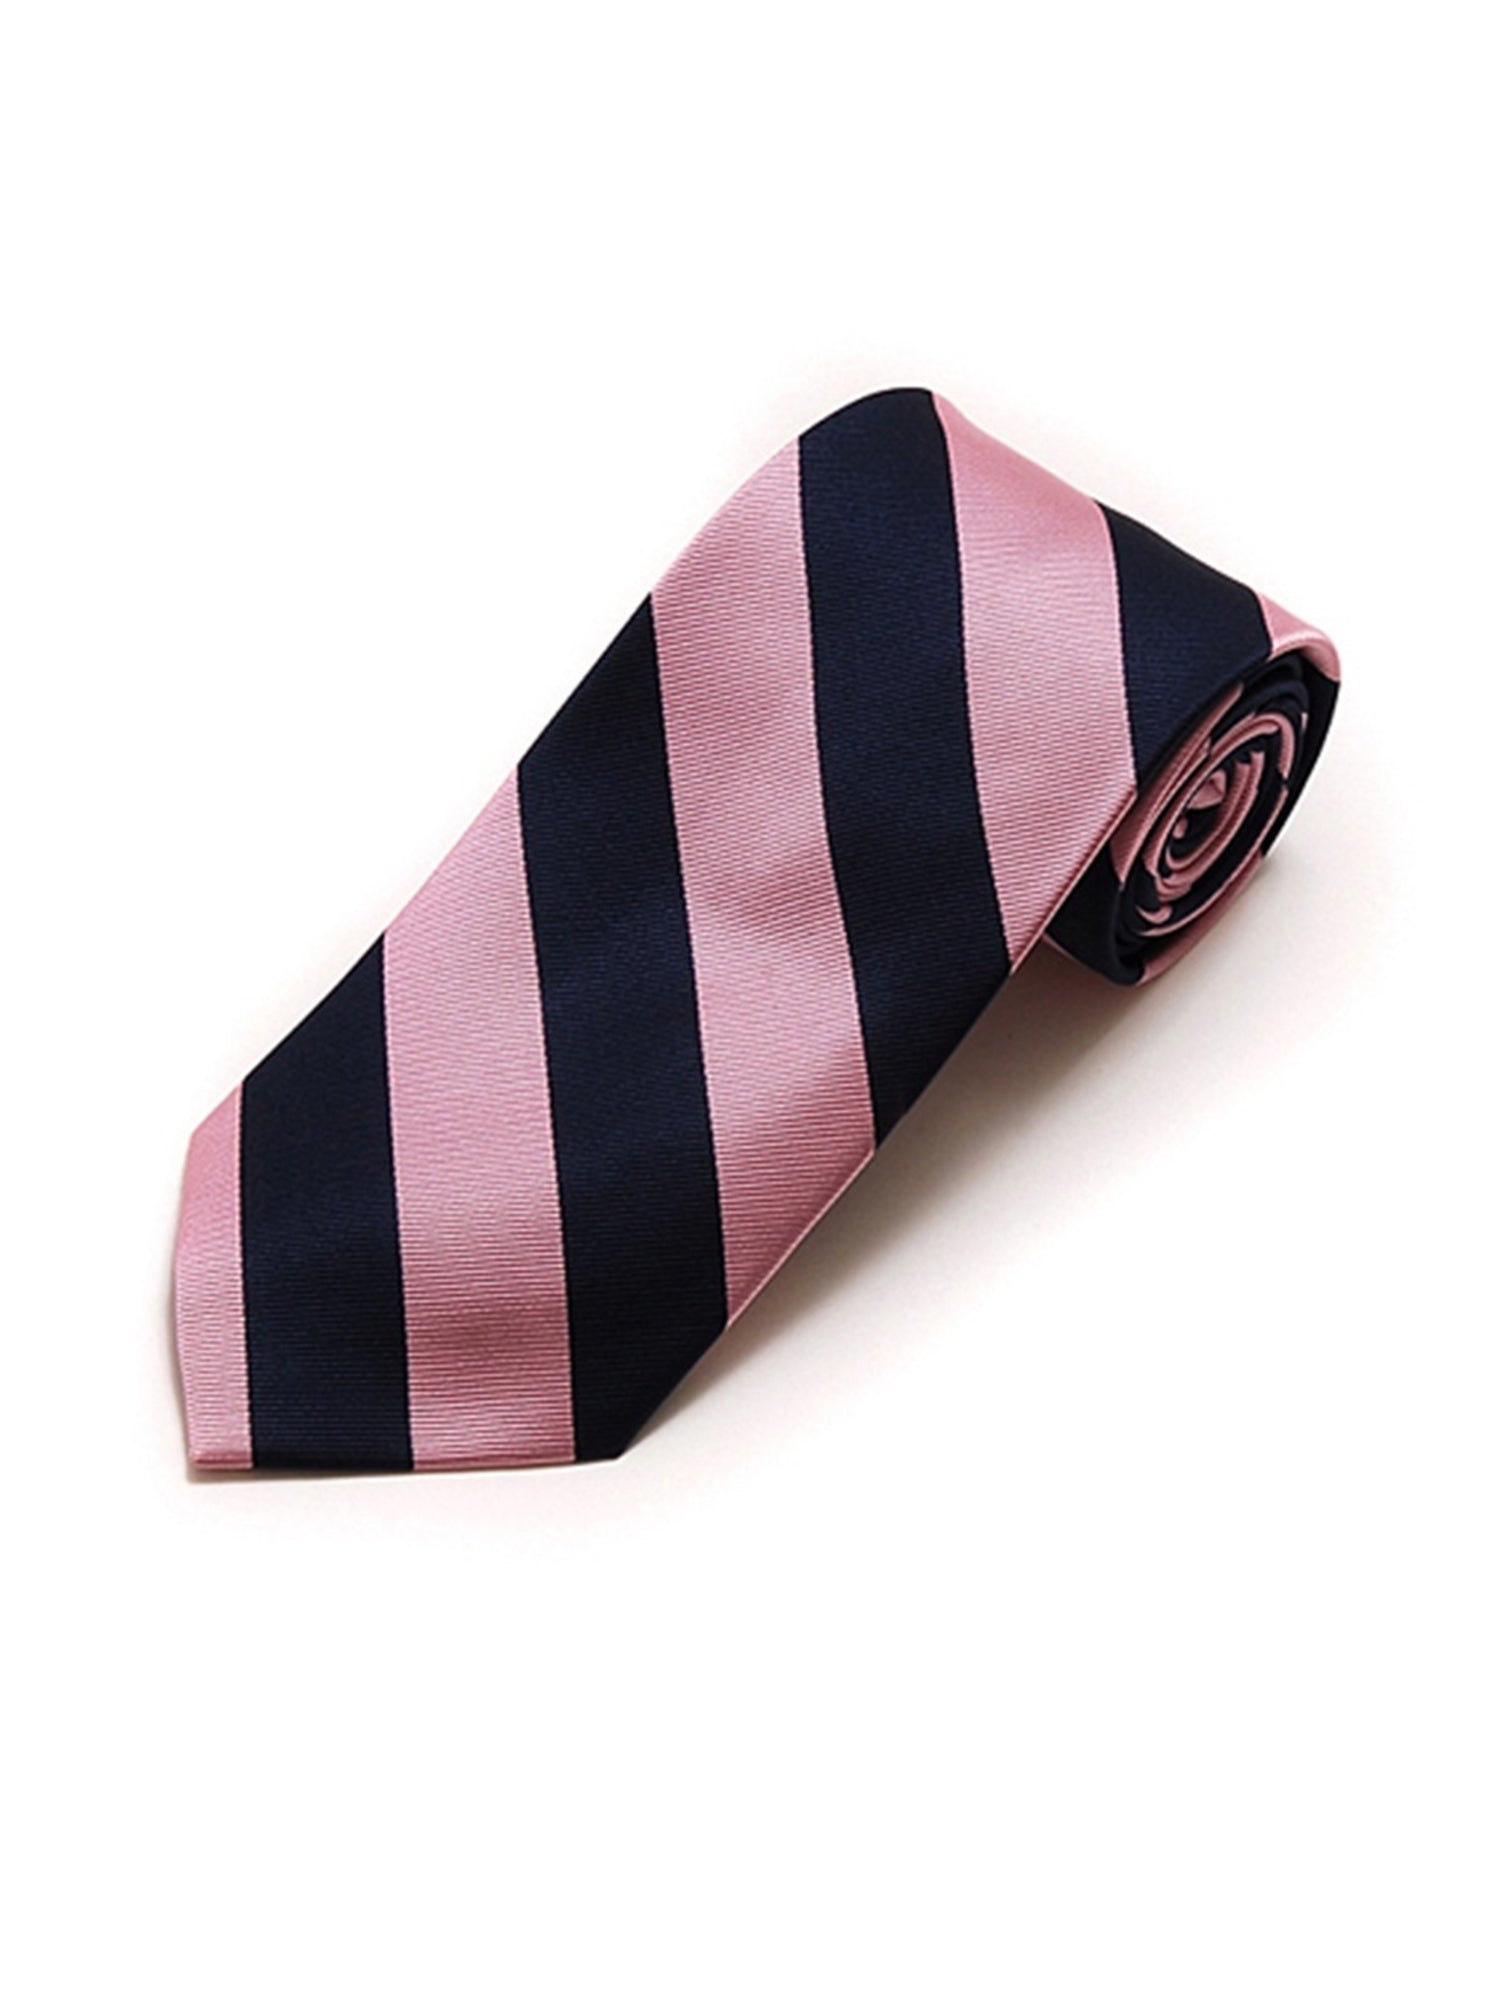 Men's College Striped Colored Silk Long Or X-Long Neck Tie Neck Tie TheDapperTie Pink & Navy 57" long & 3.25" wide 